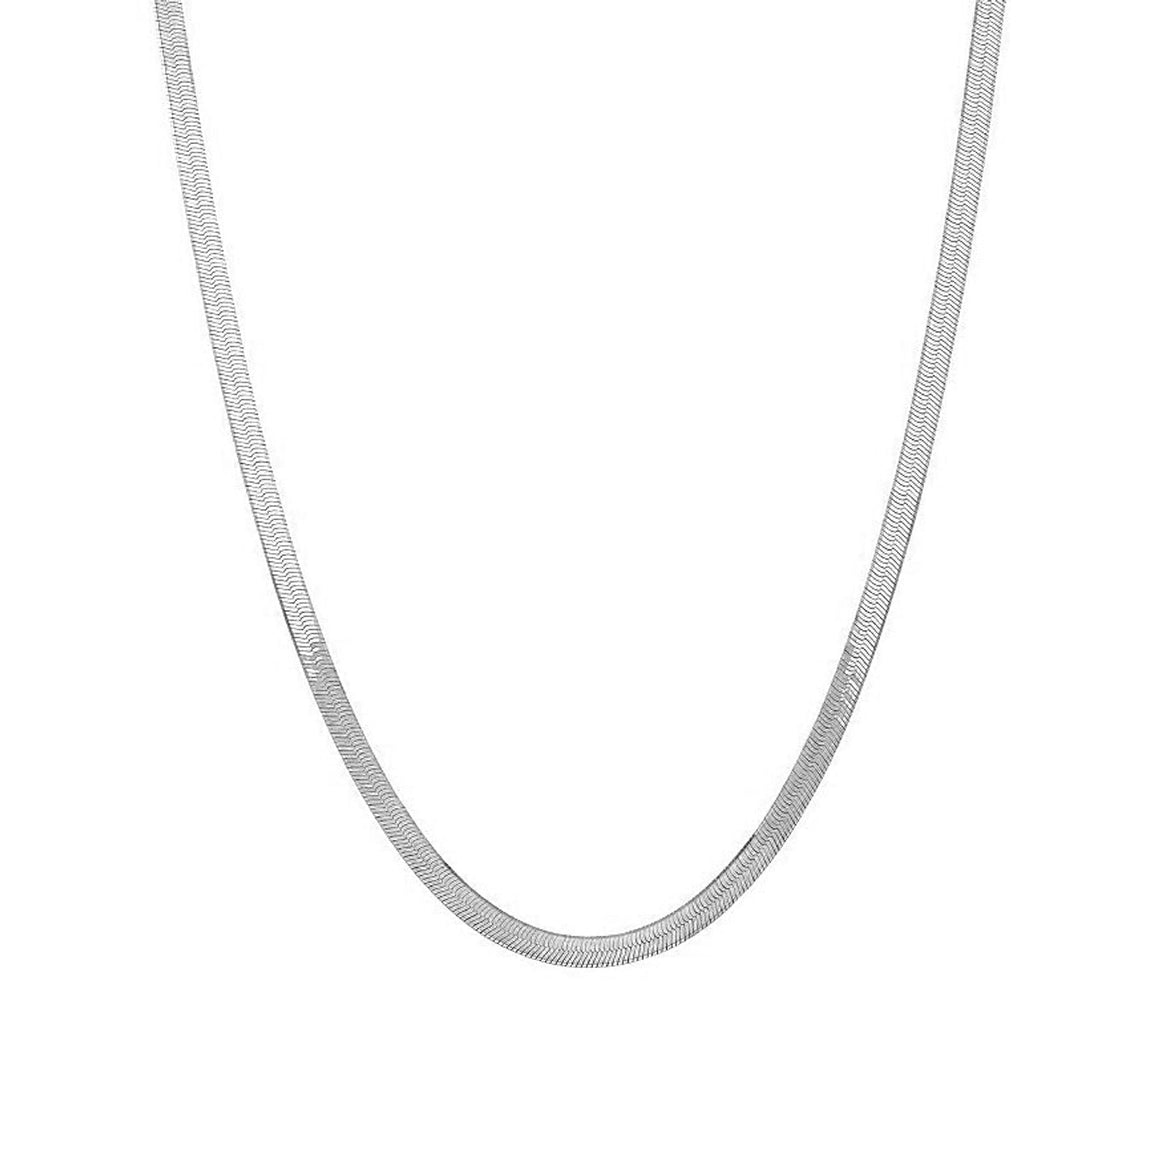 54 FLORAL 6mm HERRINGBONE FLAT CURB NECKLACE CHAIN - SILVER